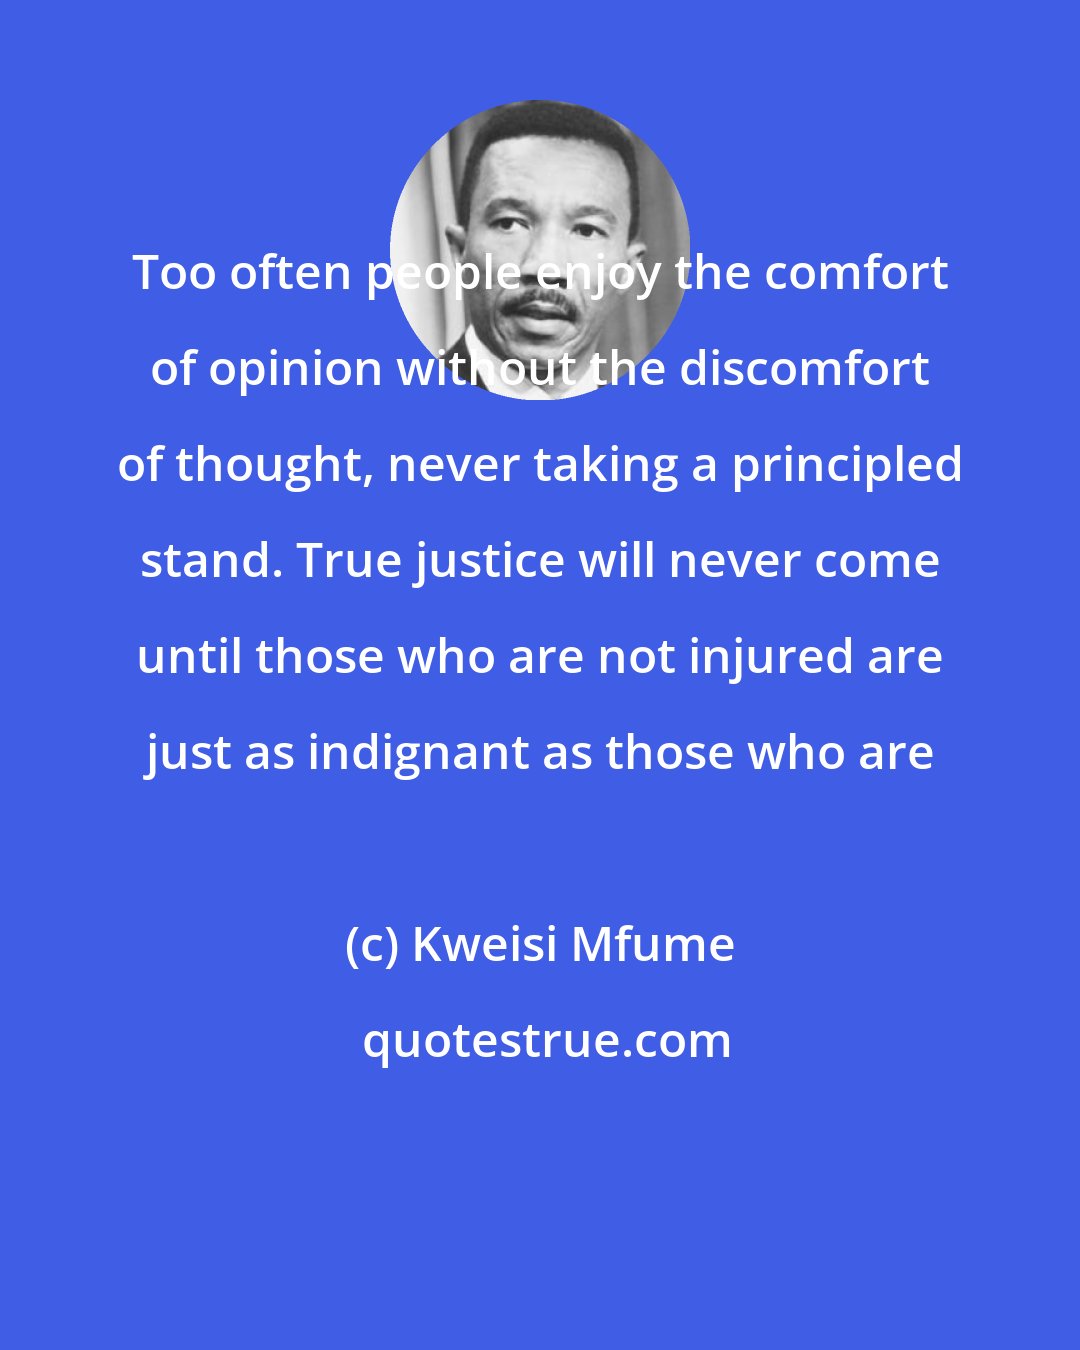 Kweisi Mfume: Too often people enjoy the comfort of opinion without the discomfort of thought, never taking a principled stand. True justice will never come until those who are not injured are just as indignant as those who are